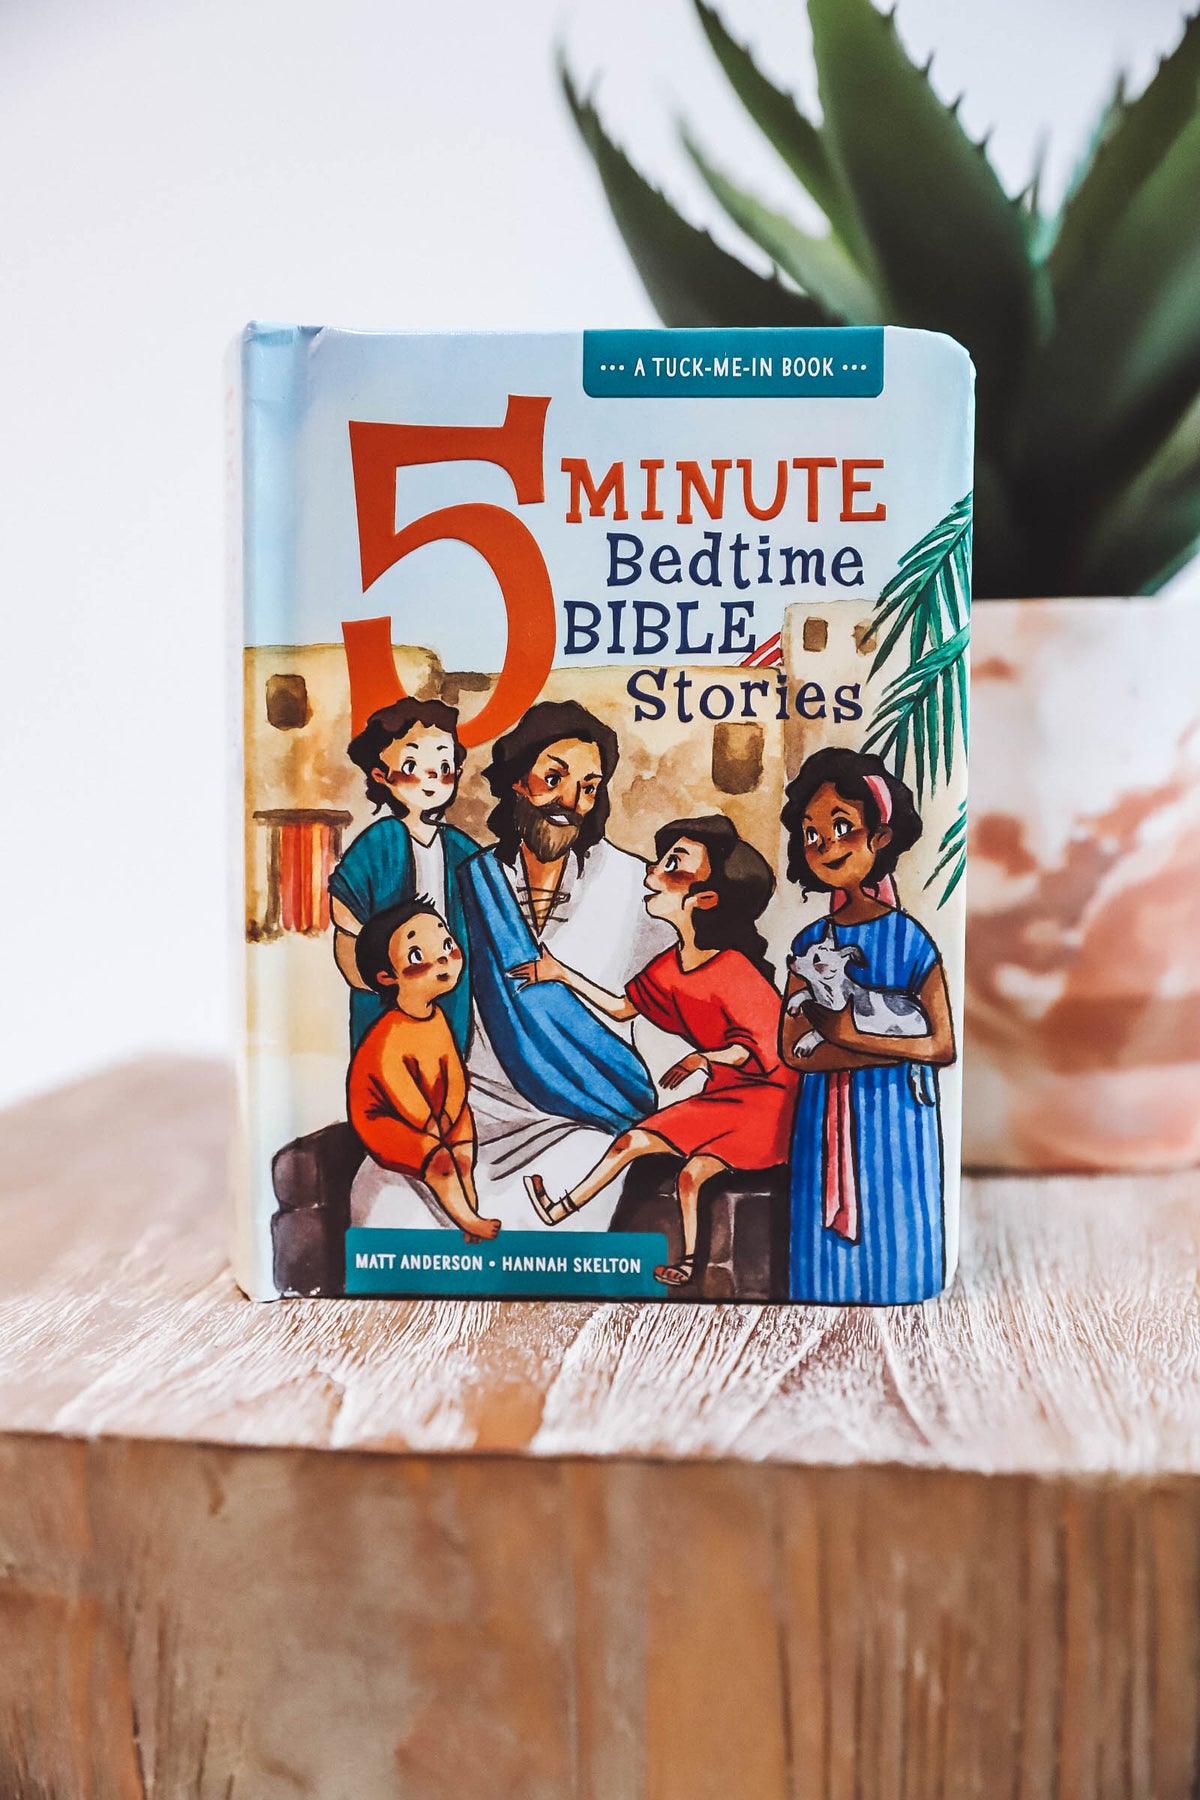 5 Minute Bedtime Bible Stories-A Tuck-Me-In Book